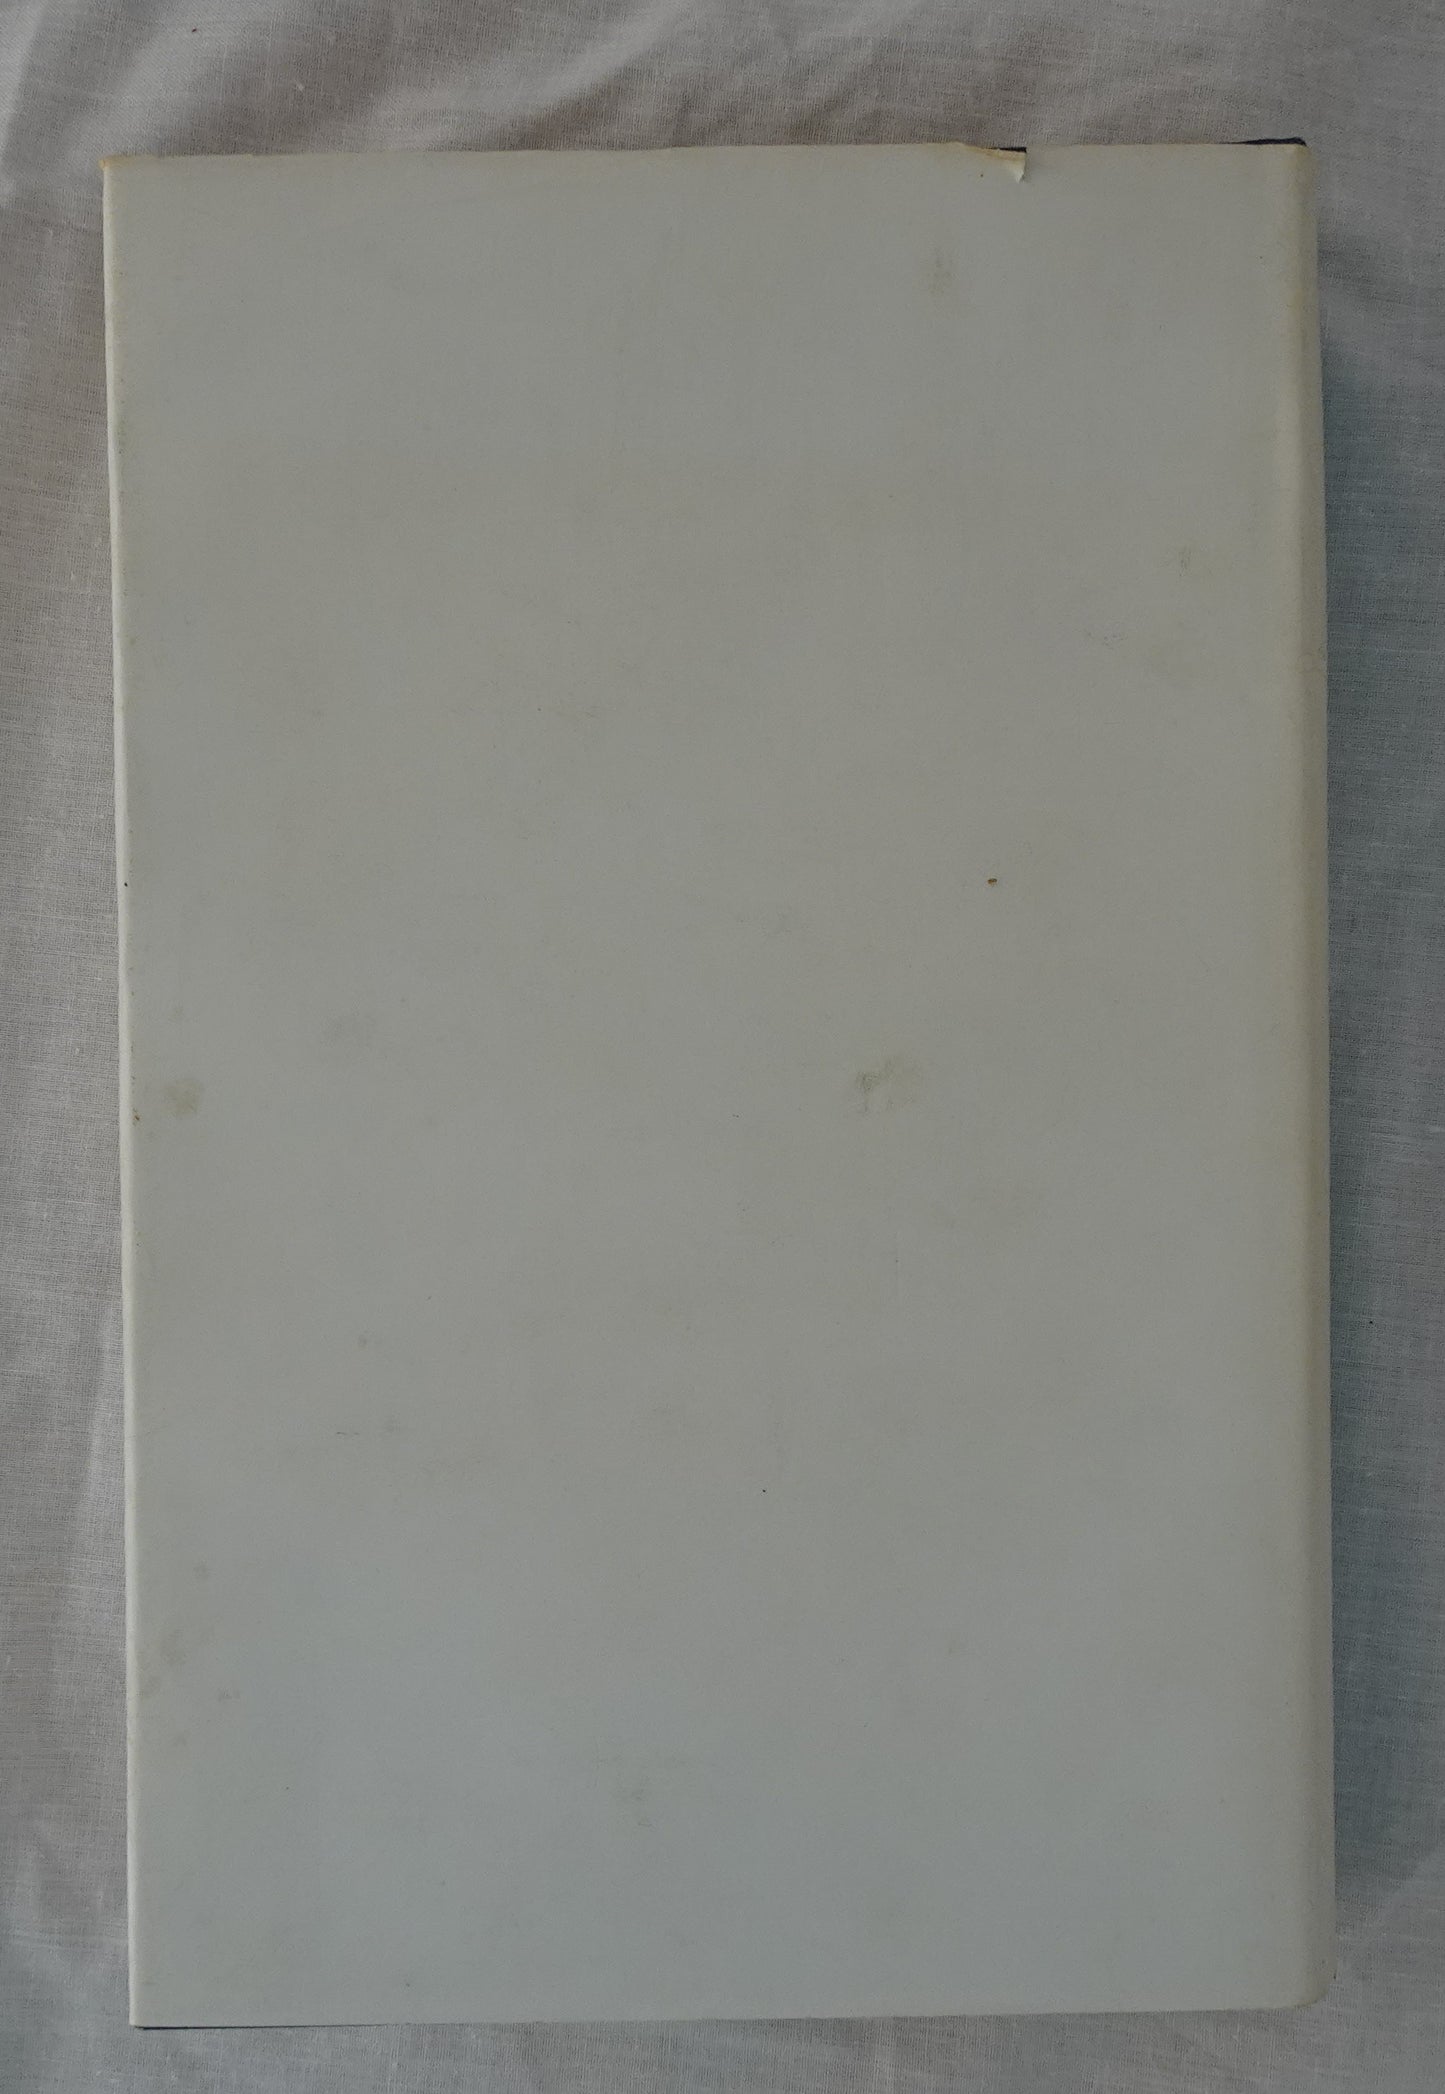 History of Unley 1871-1971 by G. B. Payne and E. Cosh